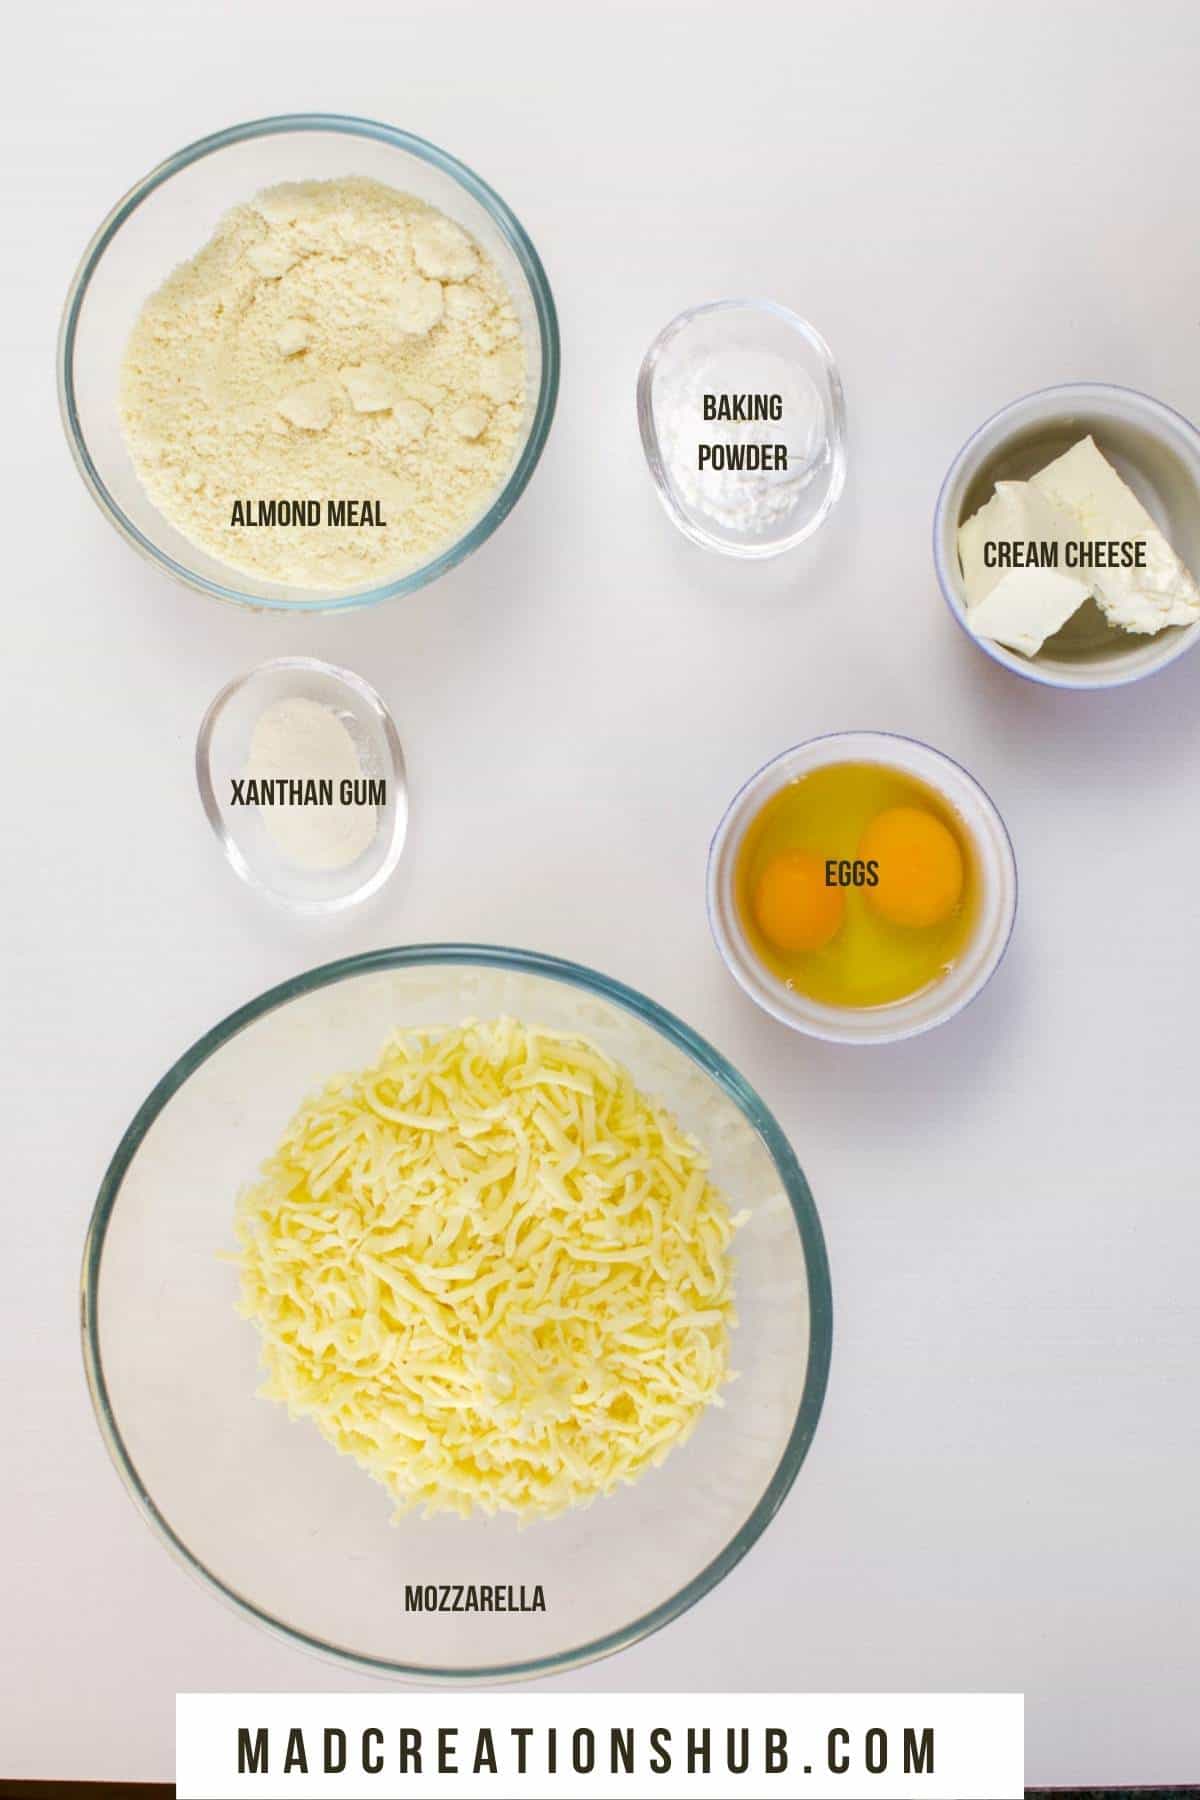 Fathead Pizza Crust Ingredients in bowls on a white background.